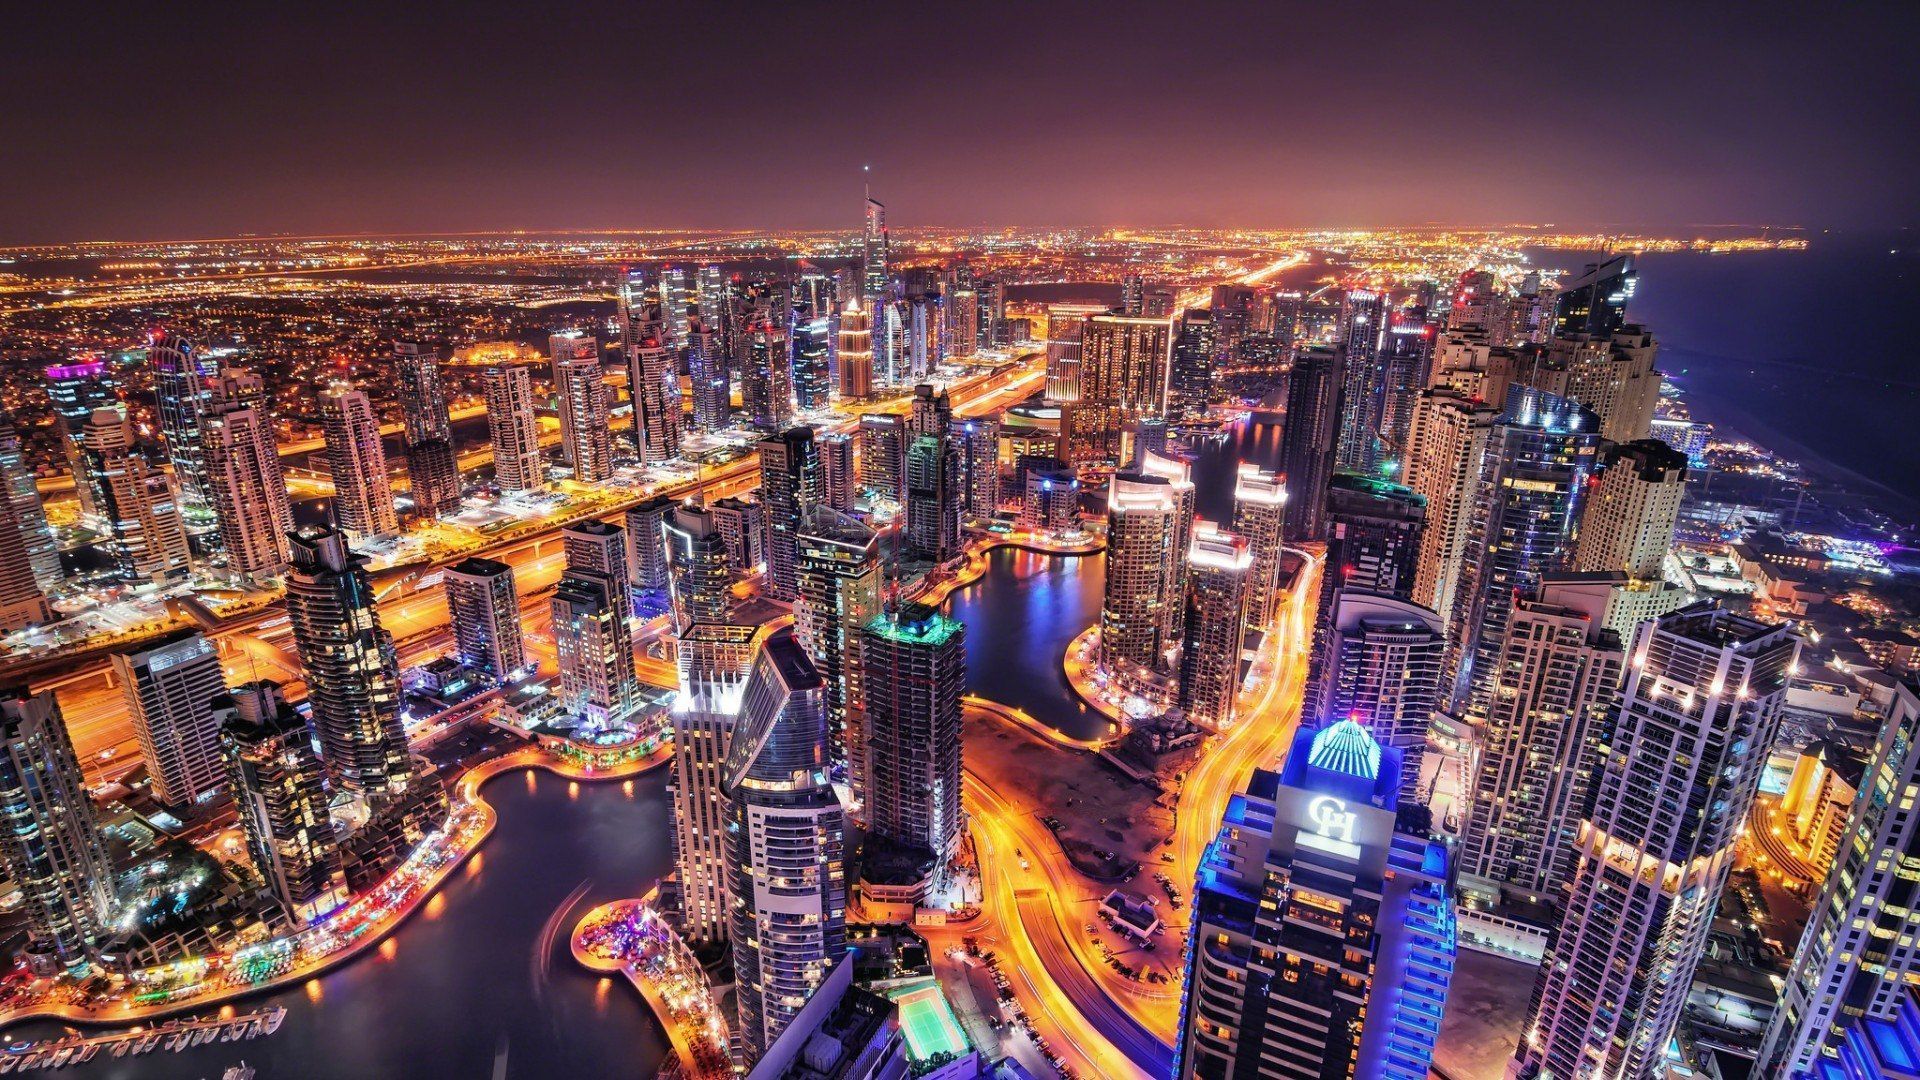 Night lights of Dubai wallpapers and images - wallpapers, pictures